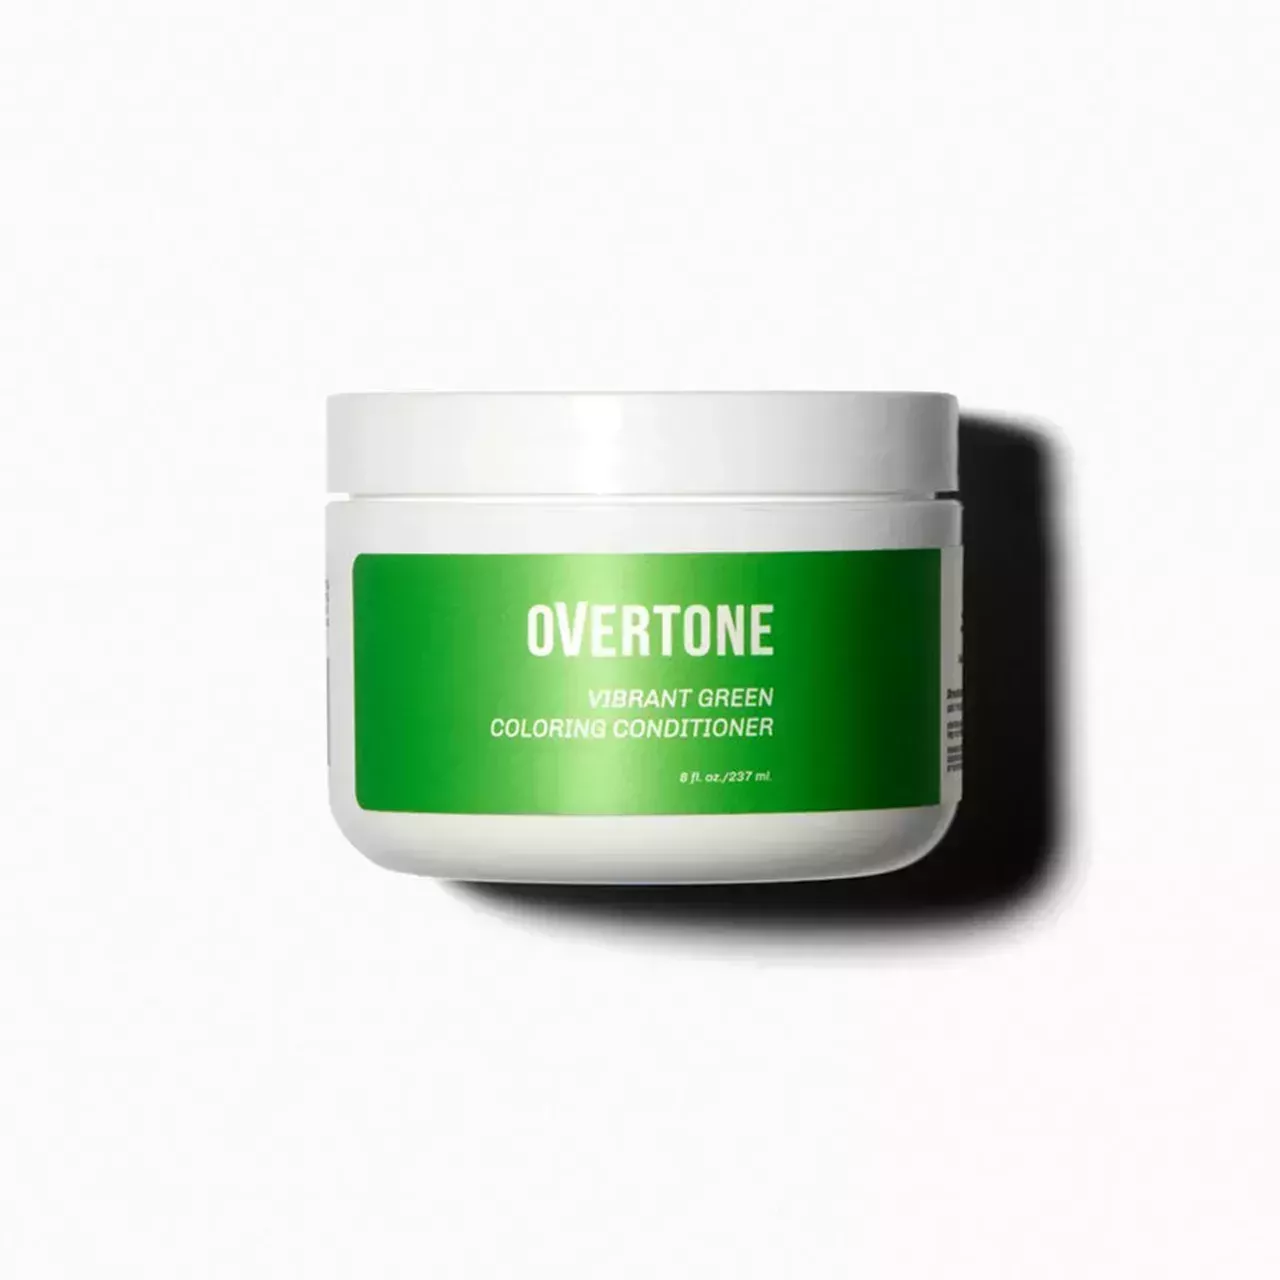 tub of Overtone Vibrant Green Coloring Conditioner on white background